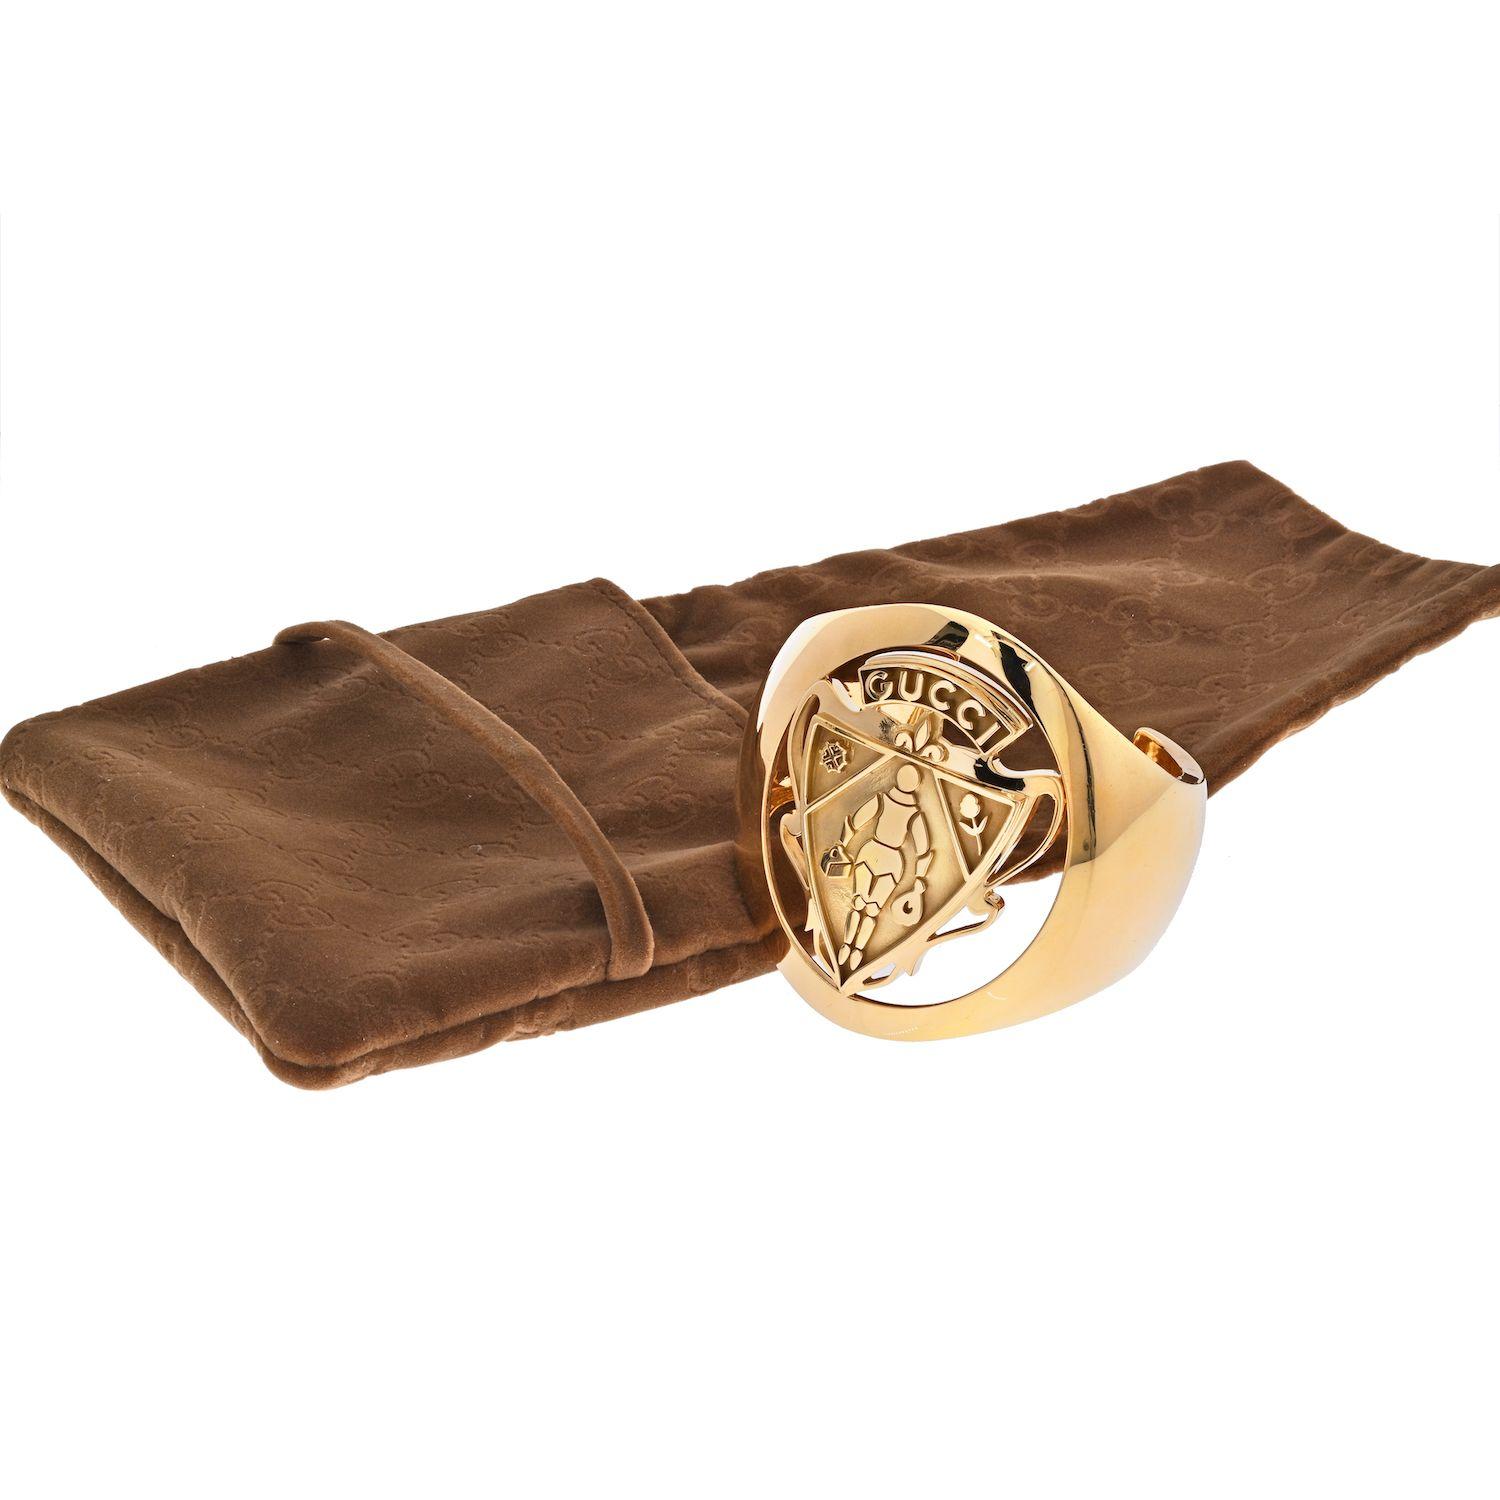 Solid 18K Yellow gold cuff bangle by Gucci. This is a rare Coat Of Arms Heritage collection item with exquisite relief detail as seen in the pictures. This bracelet features a knight in armor holding Leather Goods Luggage and Purse as part of the